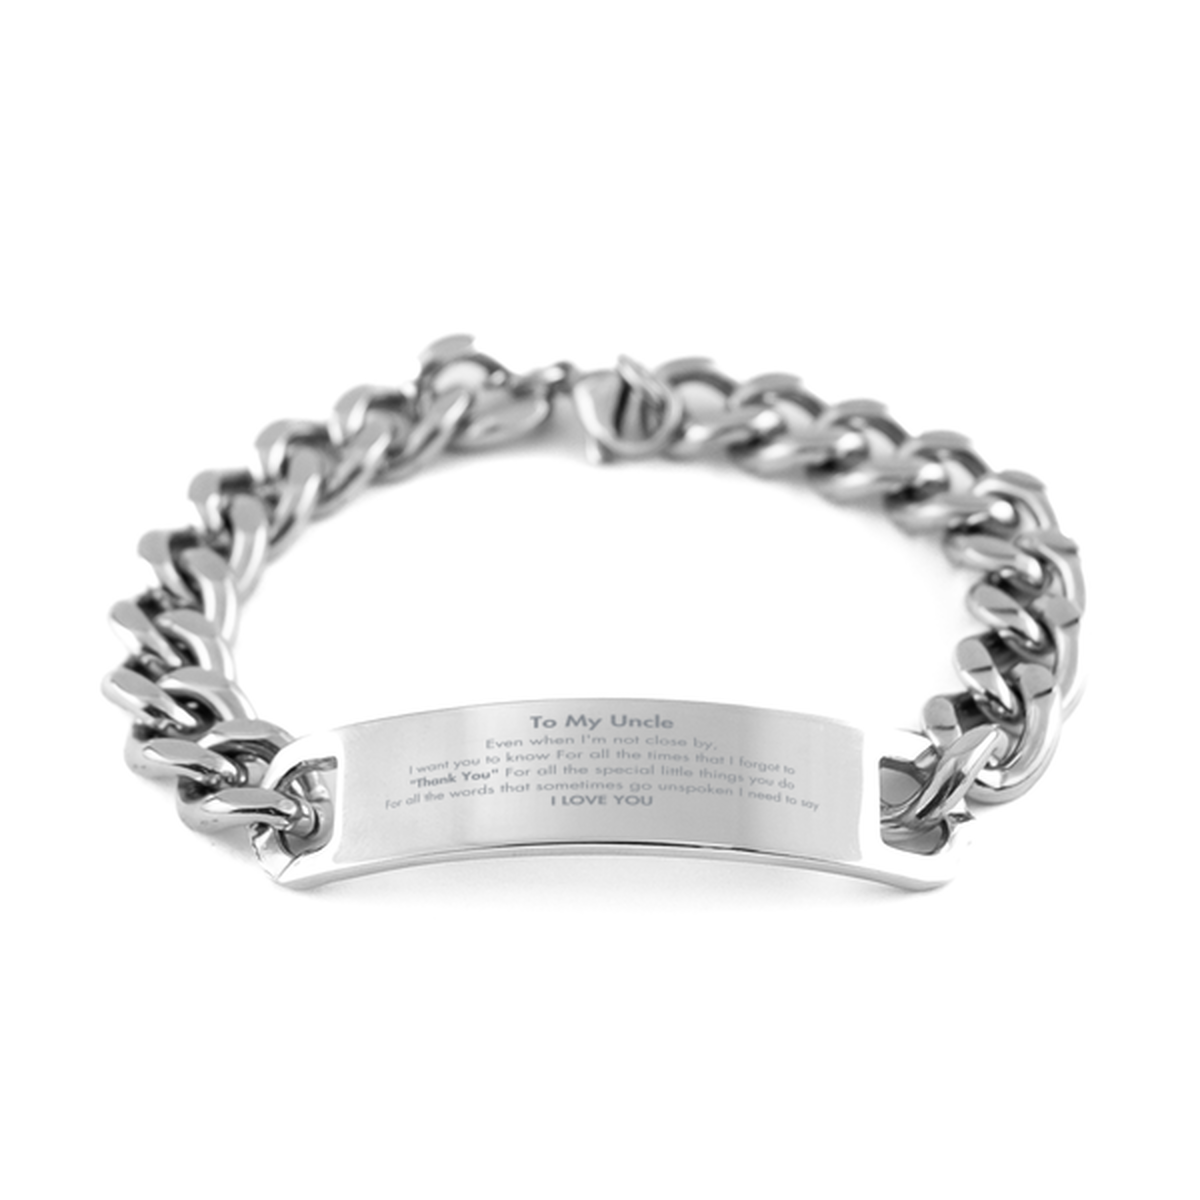 Thank You Gifts for Uncle, Keepsake Cuban Chain Stainless Steel Bracelet Gifts for Uncle Birthday Mother's day Father's Day Uncle For all the words That sometimes go unspoken I need to say I LOVE YOU